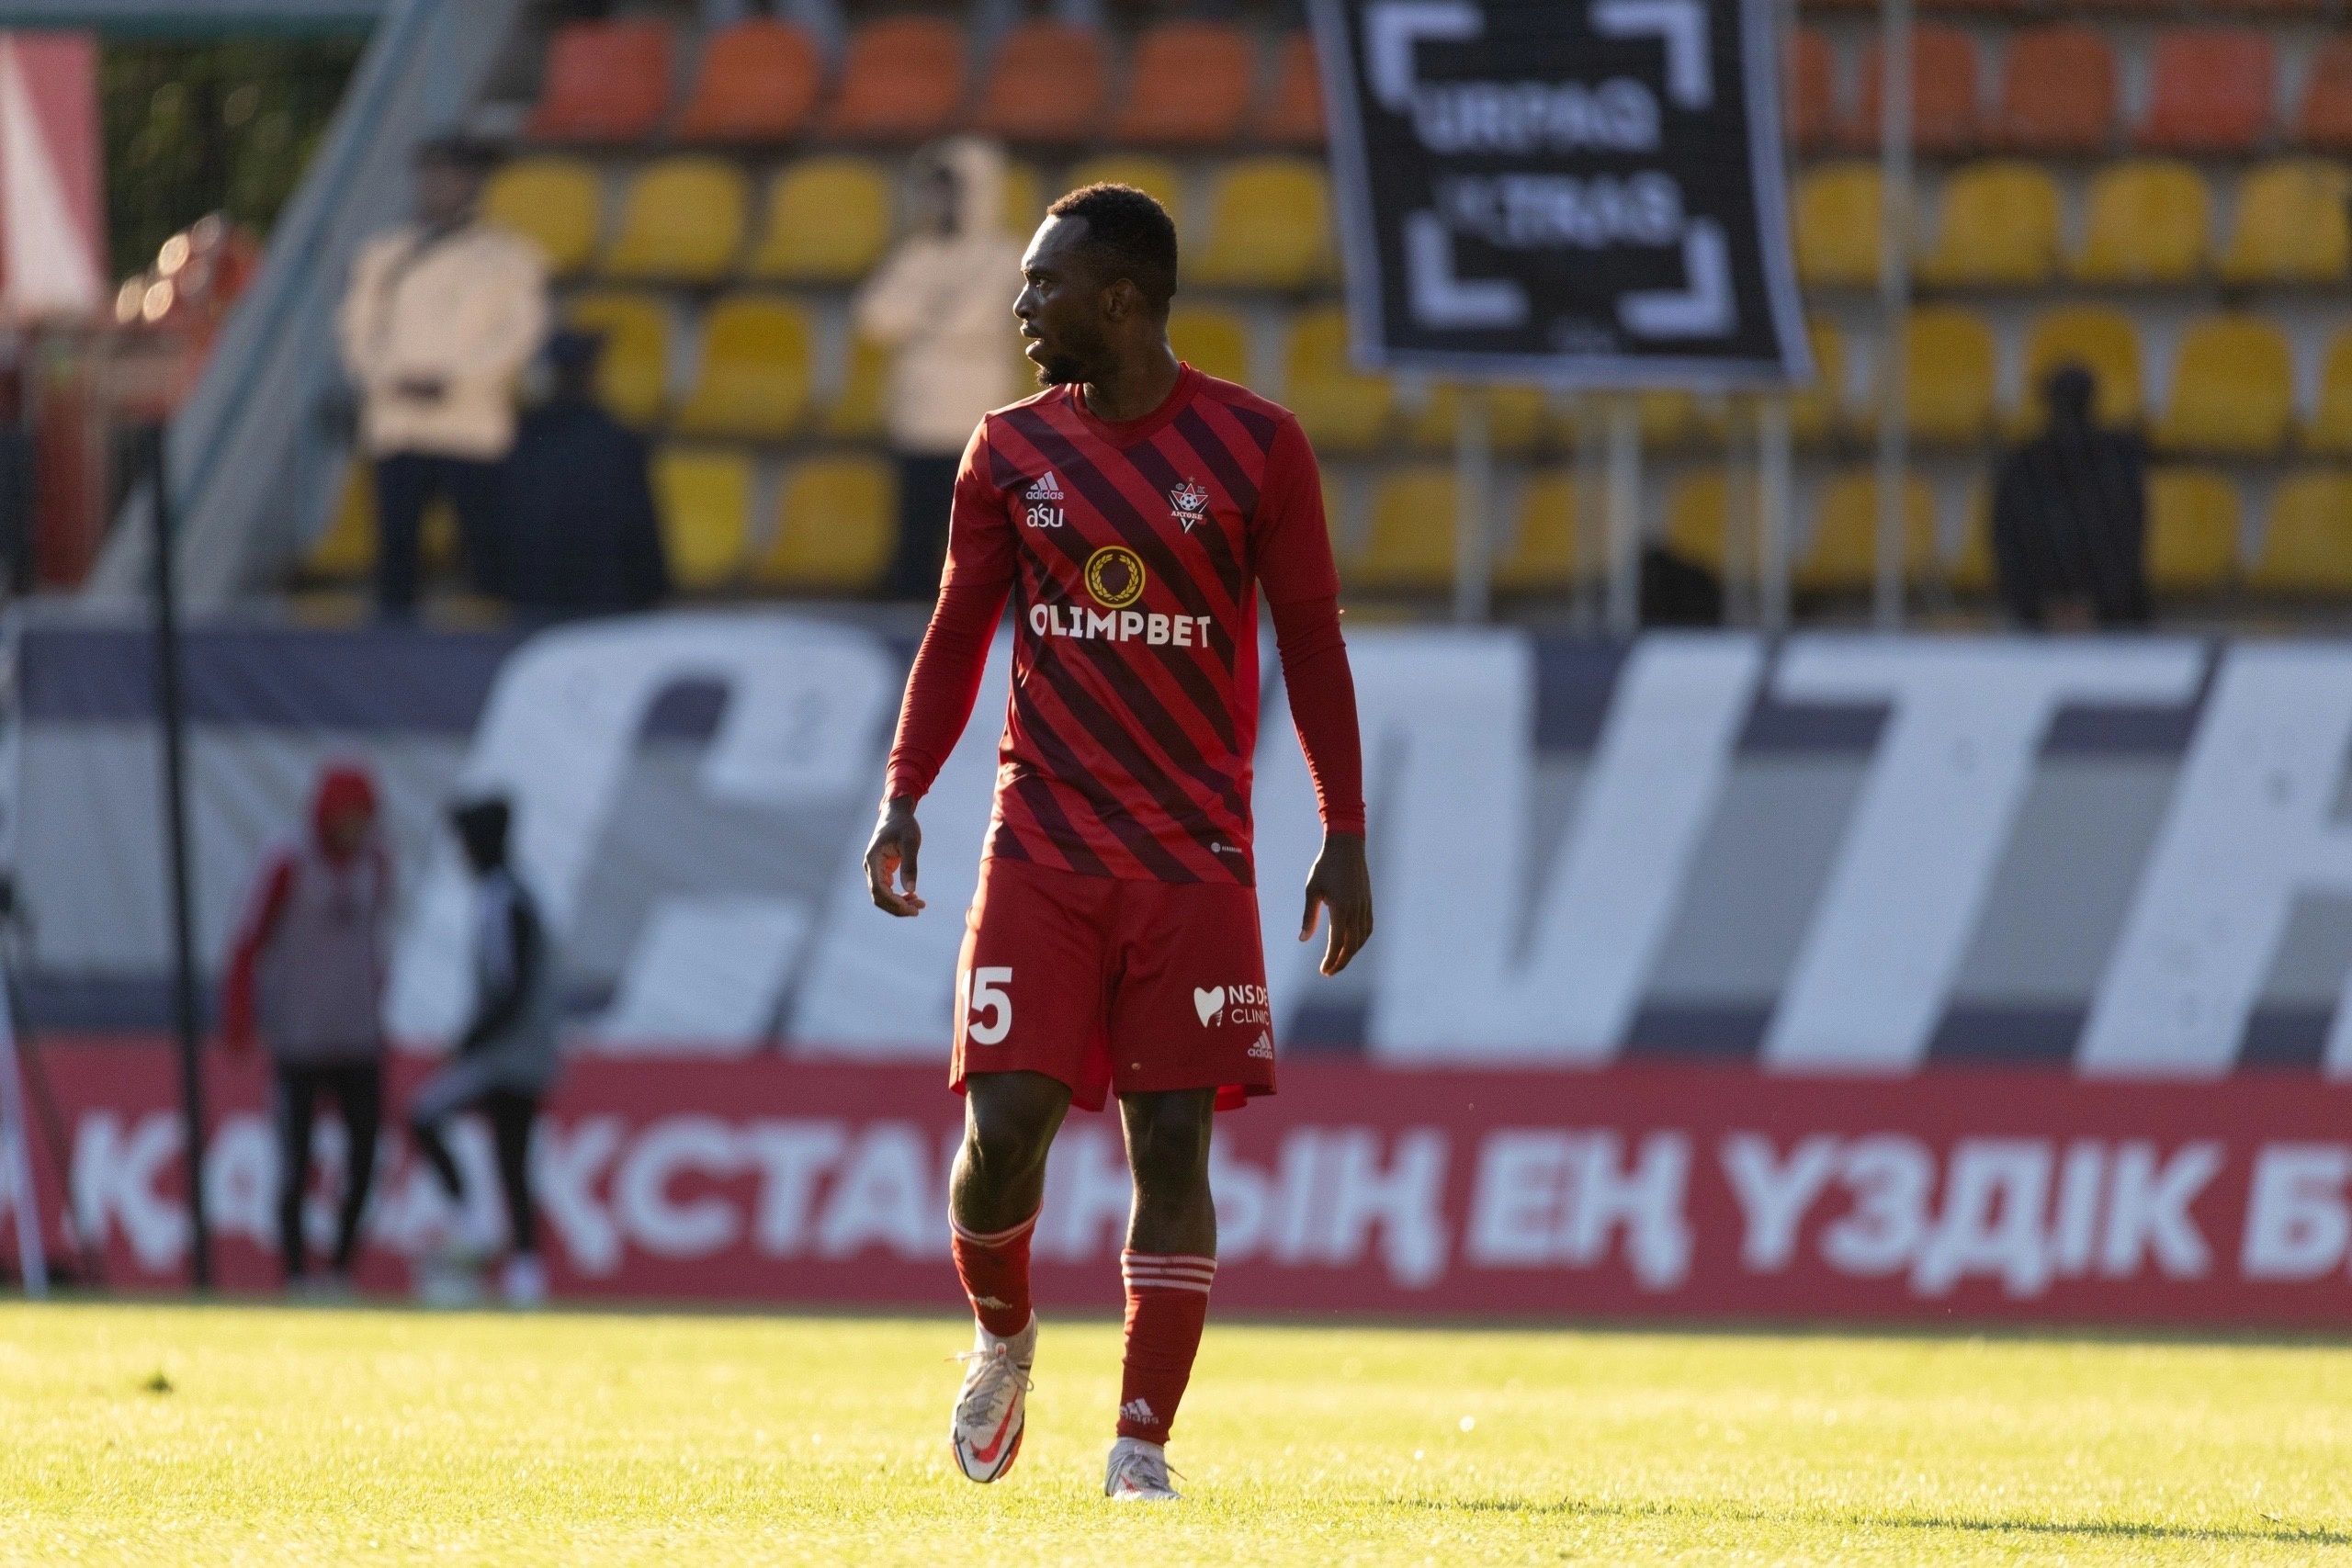 Anderson Niangbo: I am very happy that I scored my first goal